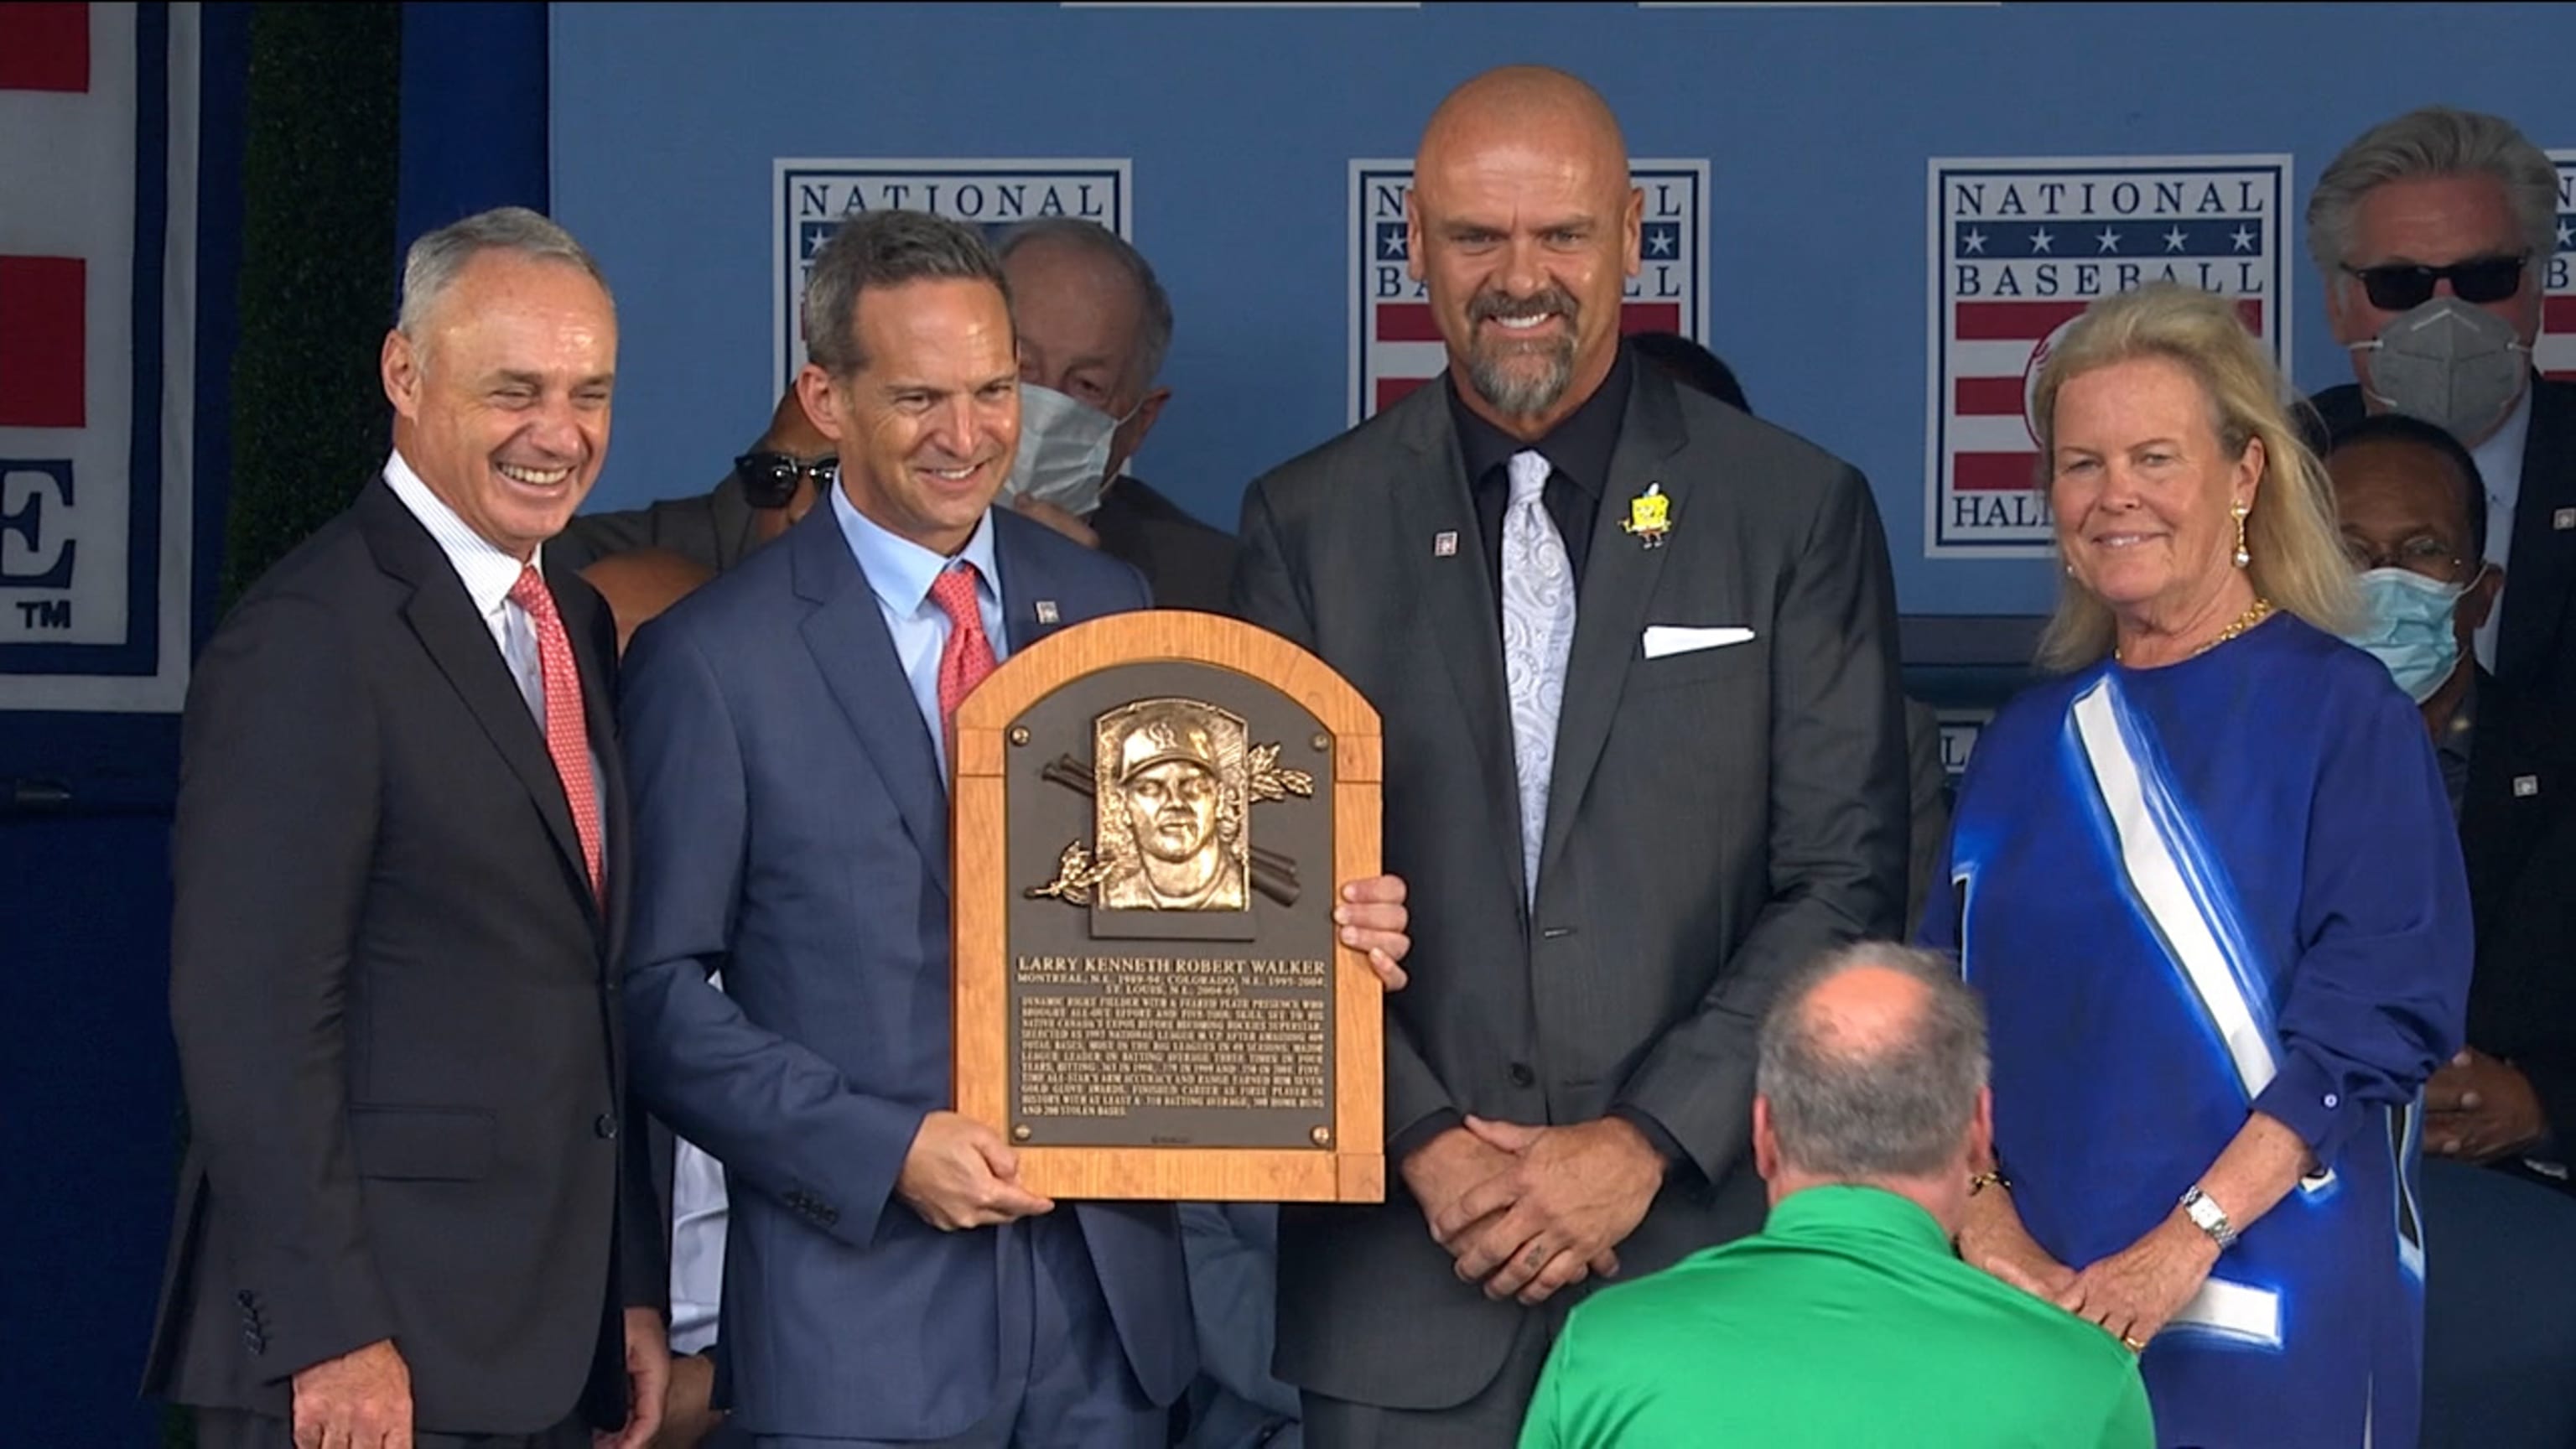 Larry Walker inducted into Baseball Hall of Fame